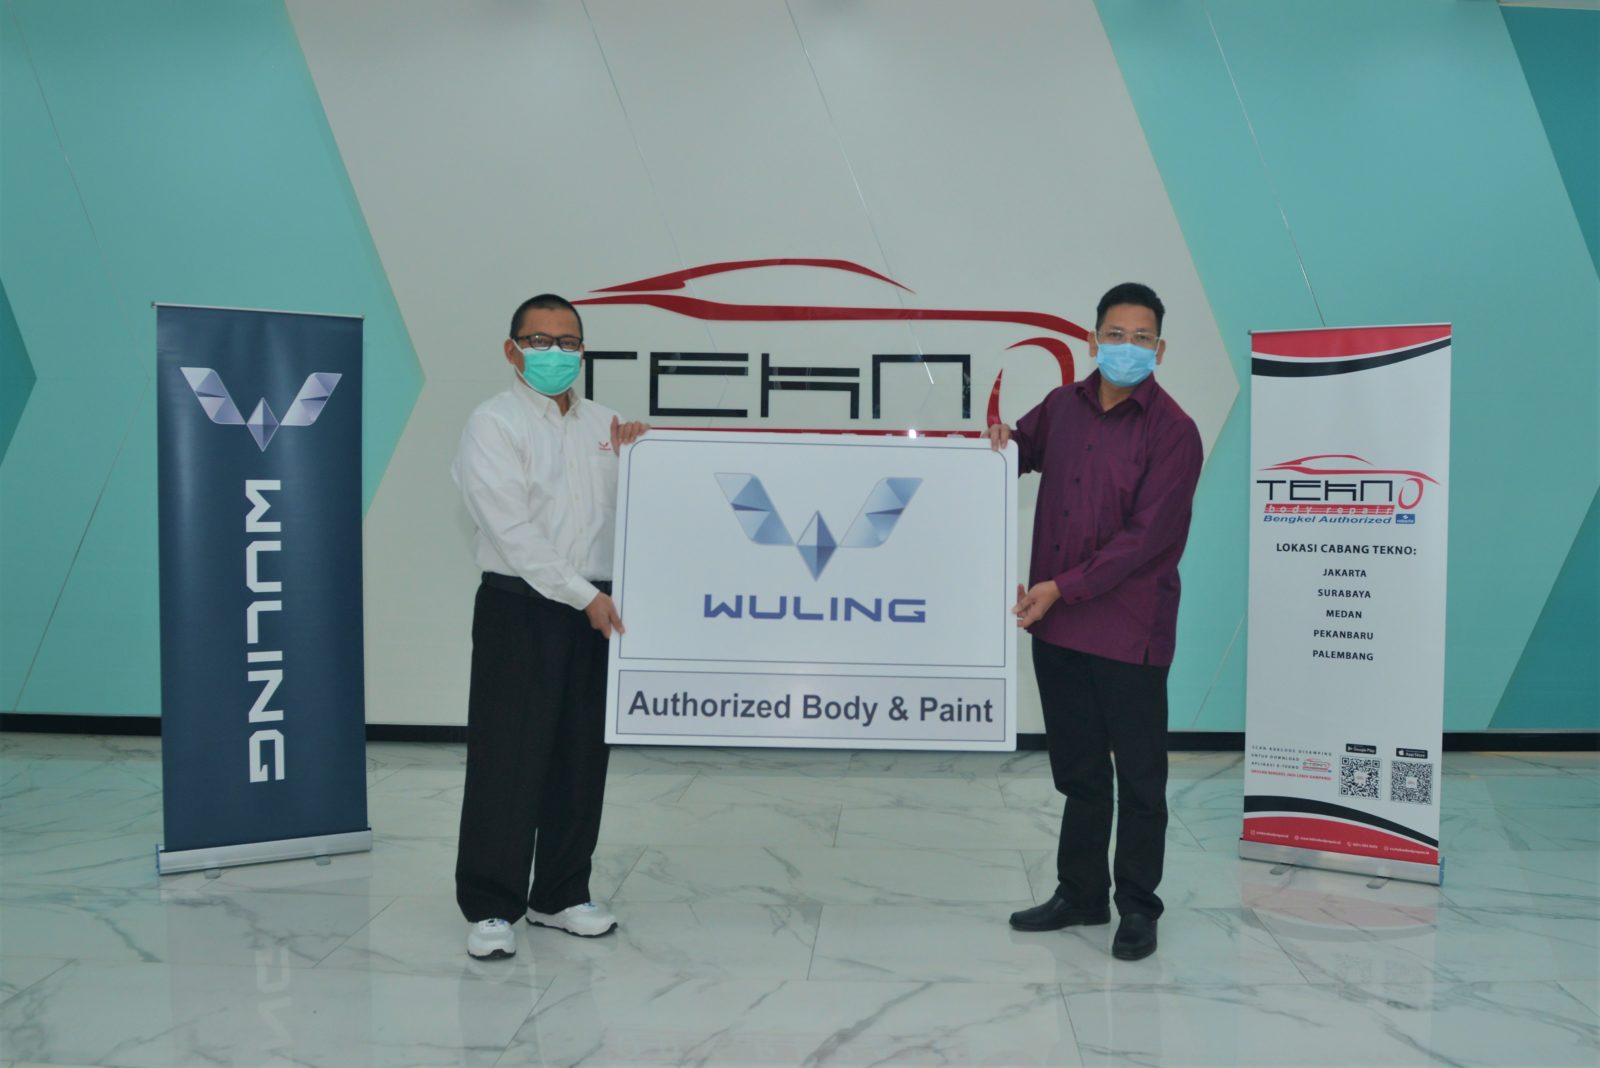 Image Adding Ease of After-sales Service, Wuling Collaborates with Tekno Body Repair